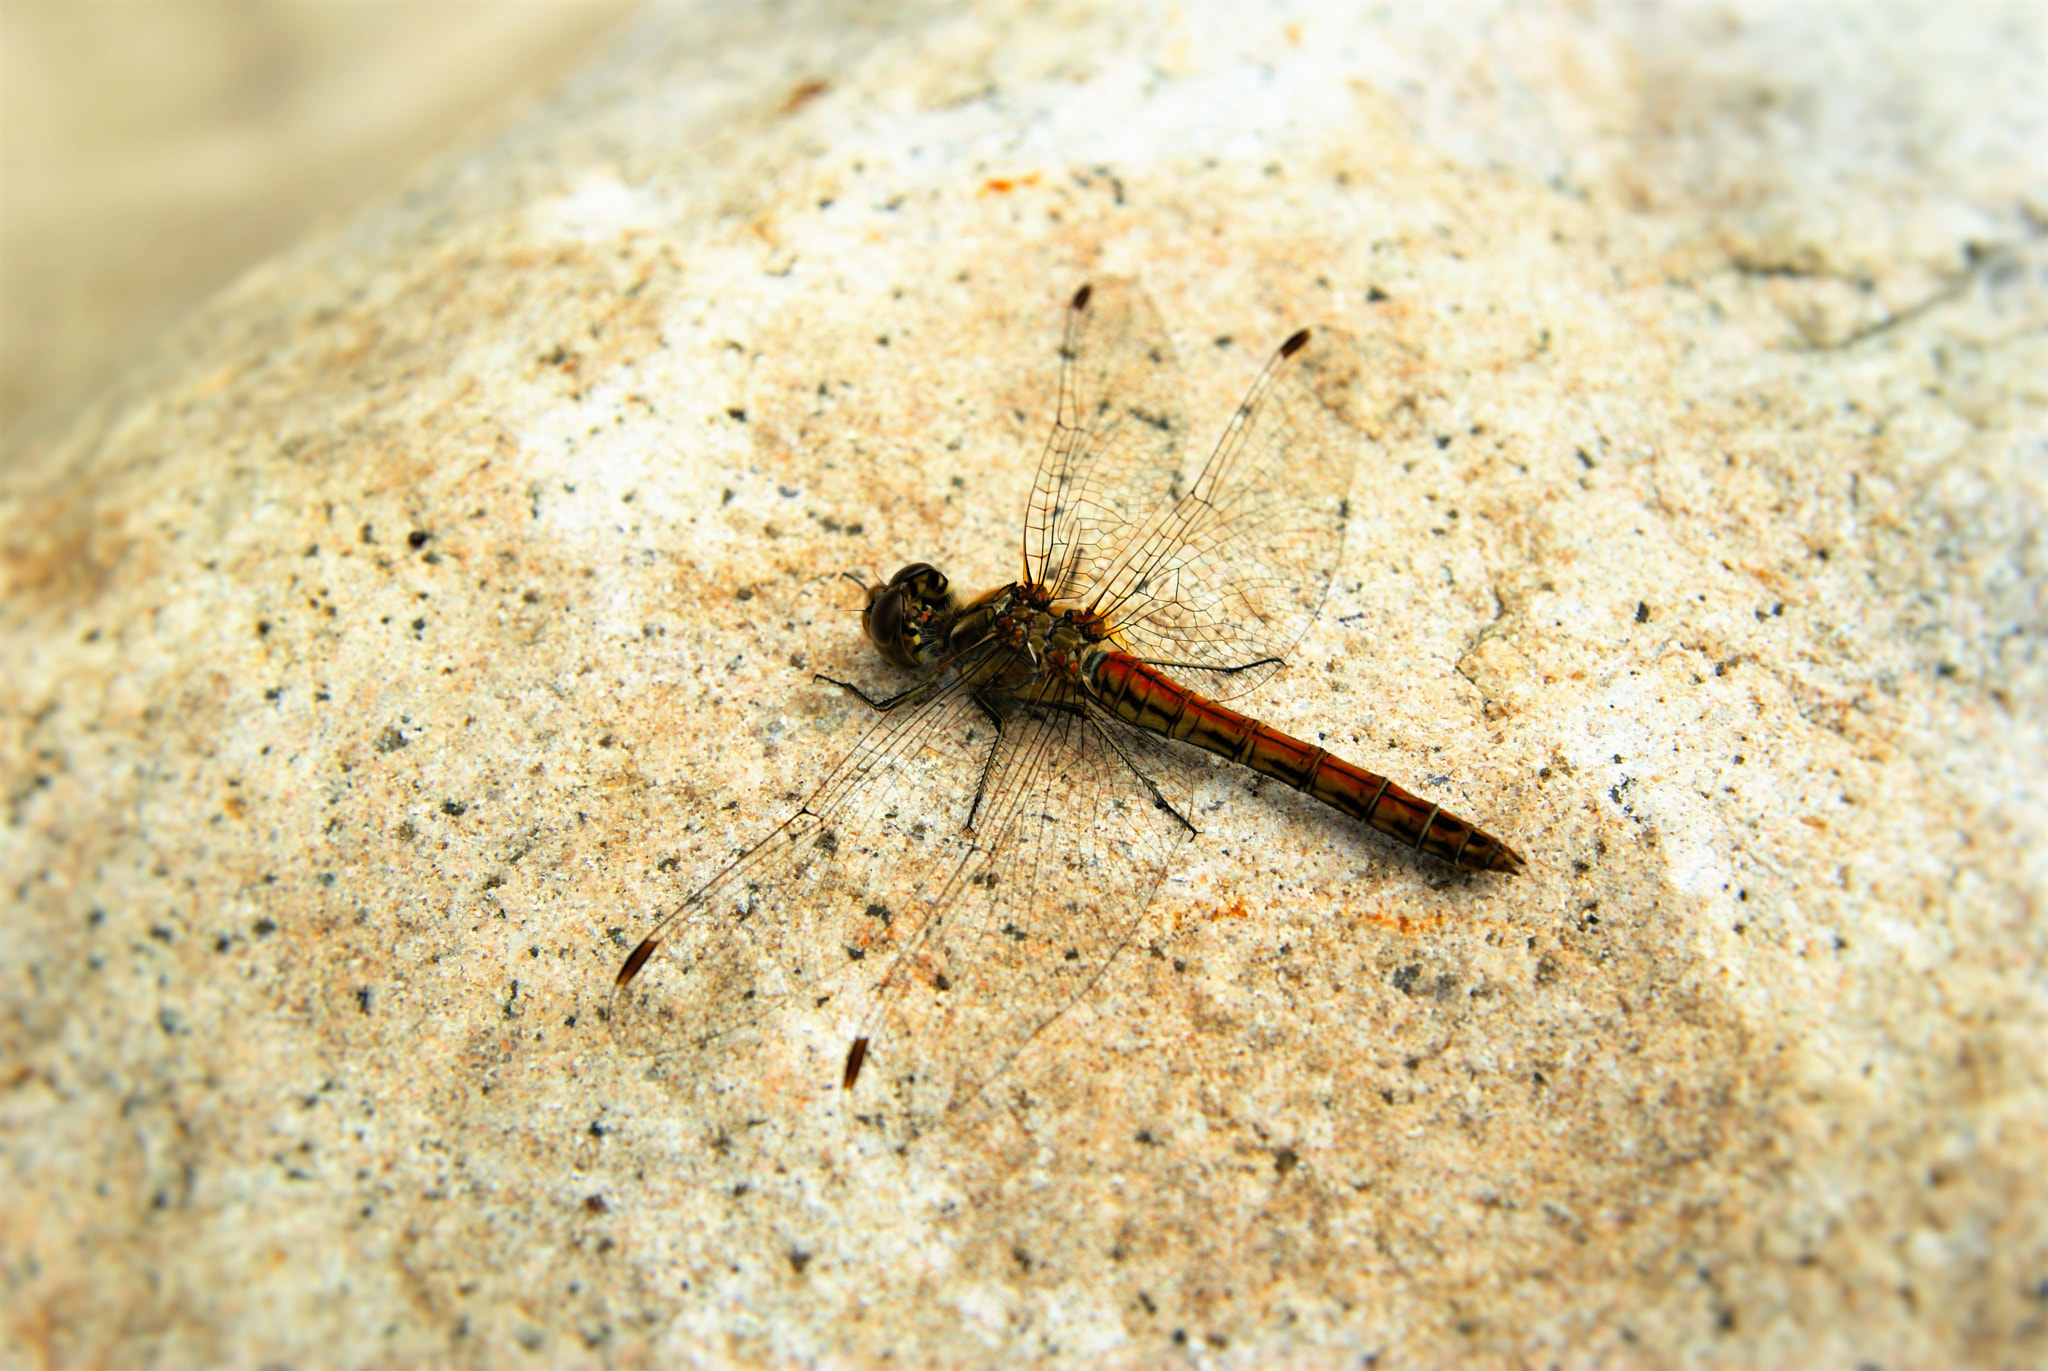 Sony Alpha DSLR-A300 + Tamron SP AF 17-50mm F2.8 XR Di II LD Aspherical (IF) sample photo. Dragonfly photography